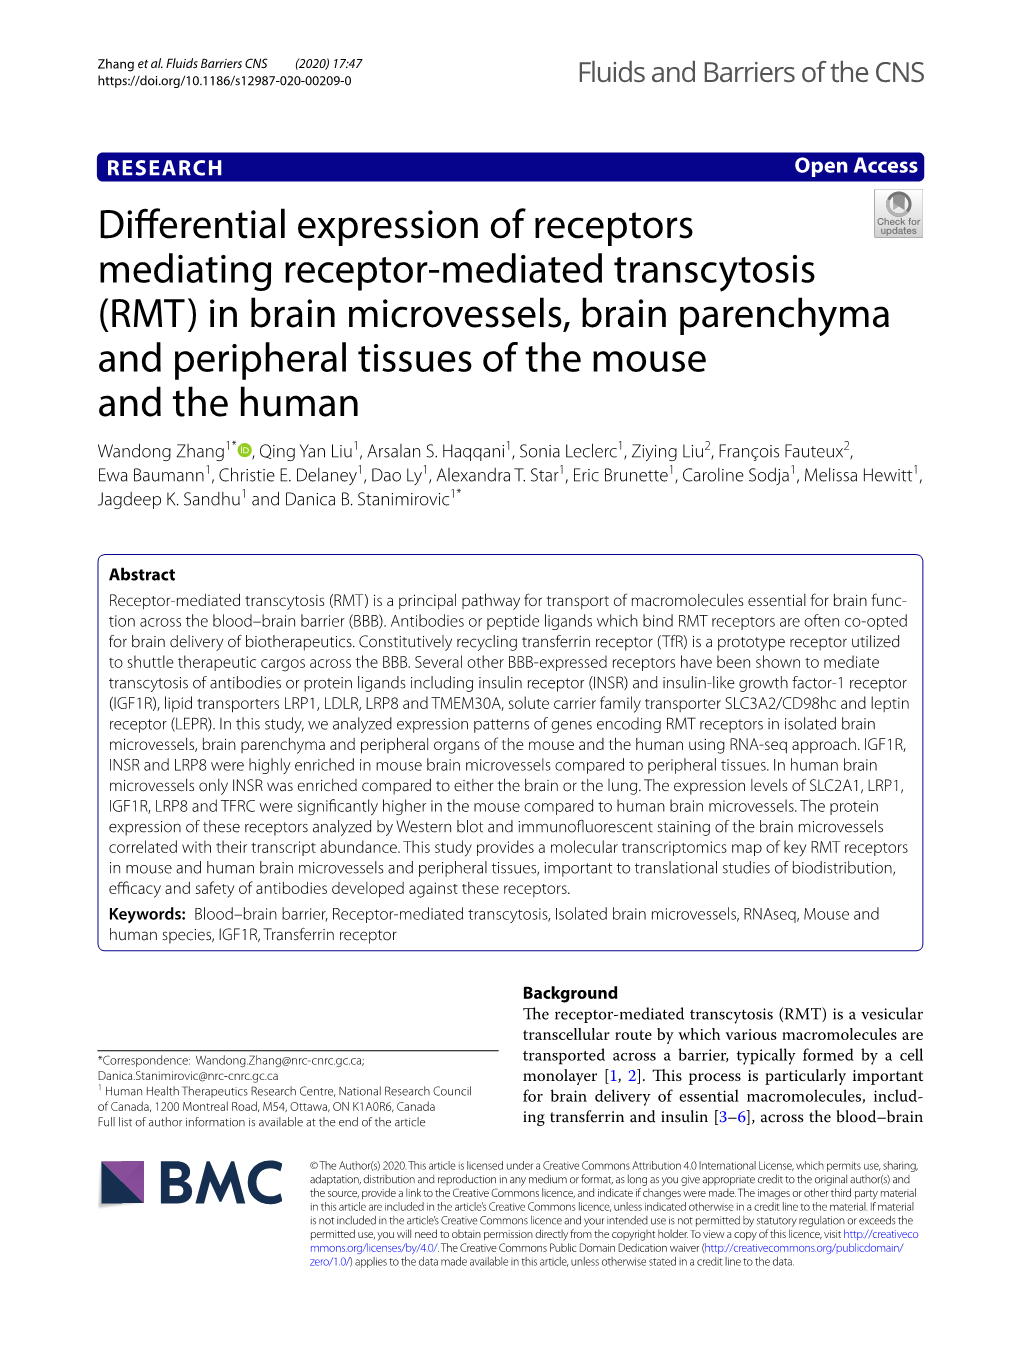 (RMT) in Brain Microvessels, Brain Parenchyma and Peripheral Tissues of the Mouse and the Human Wandong Zhang1* , Qing Yan Liu1, Arsalan S